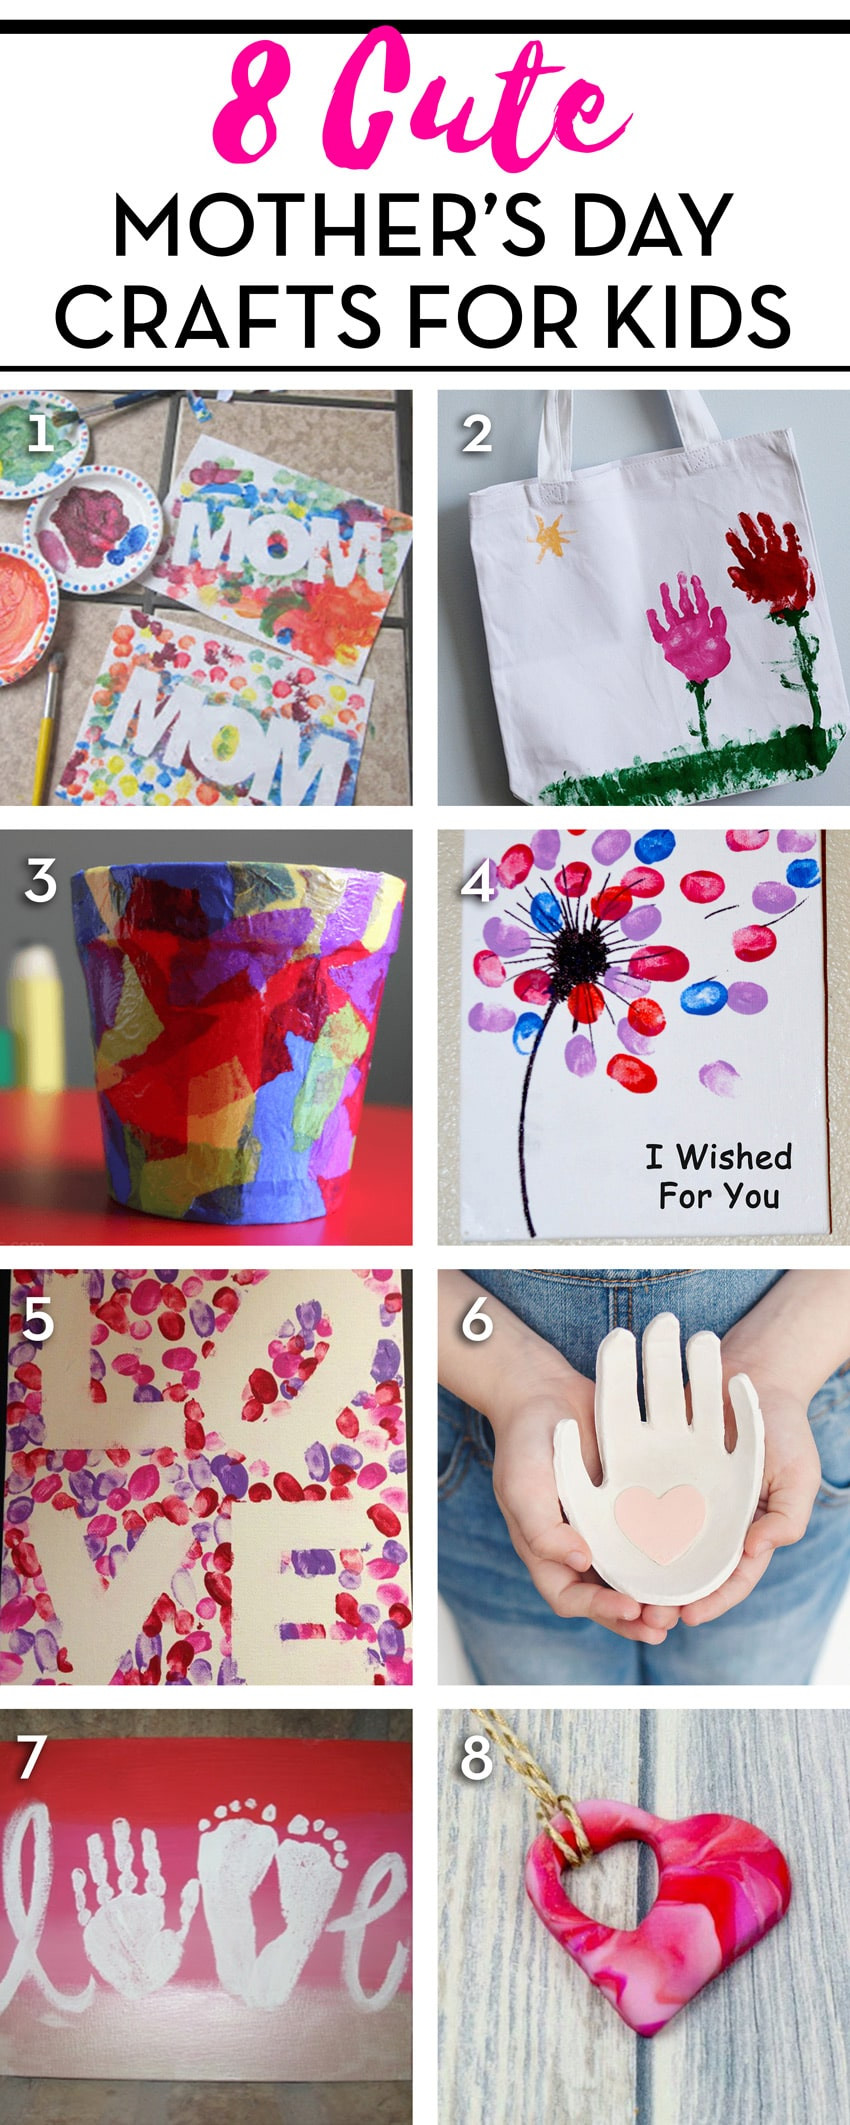 Pinterest Mothers Day Crafts
 Here are 8 Cute Mother s Day Crafts on Pinterest